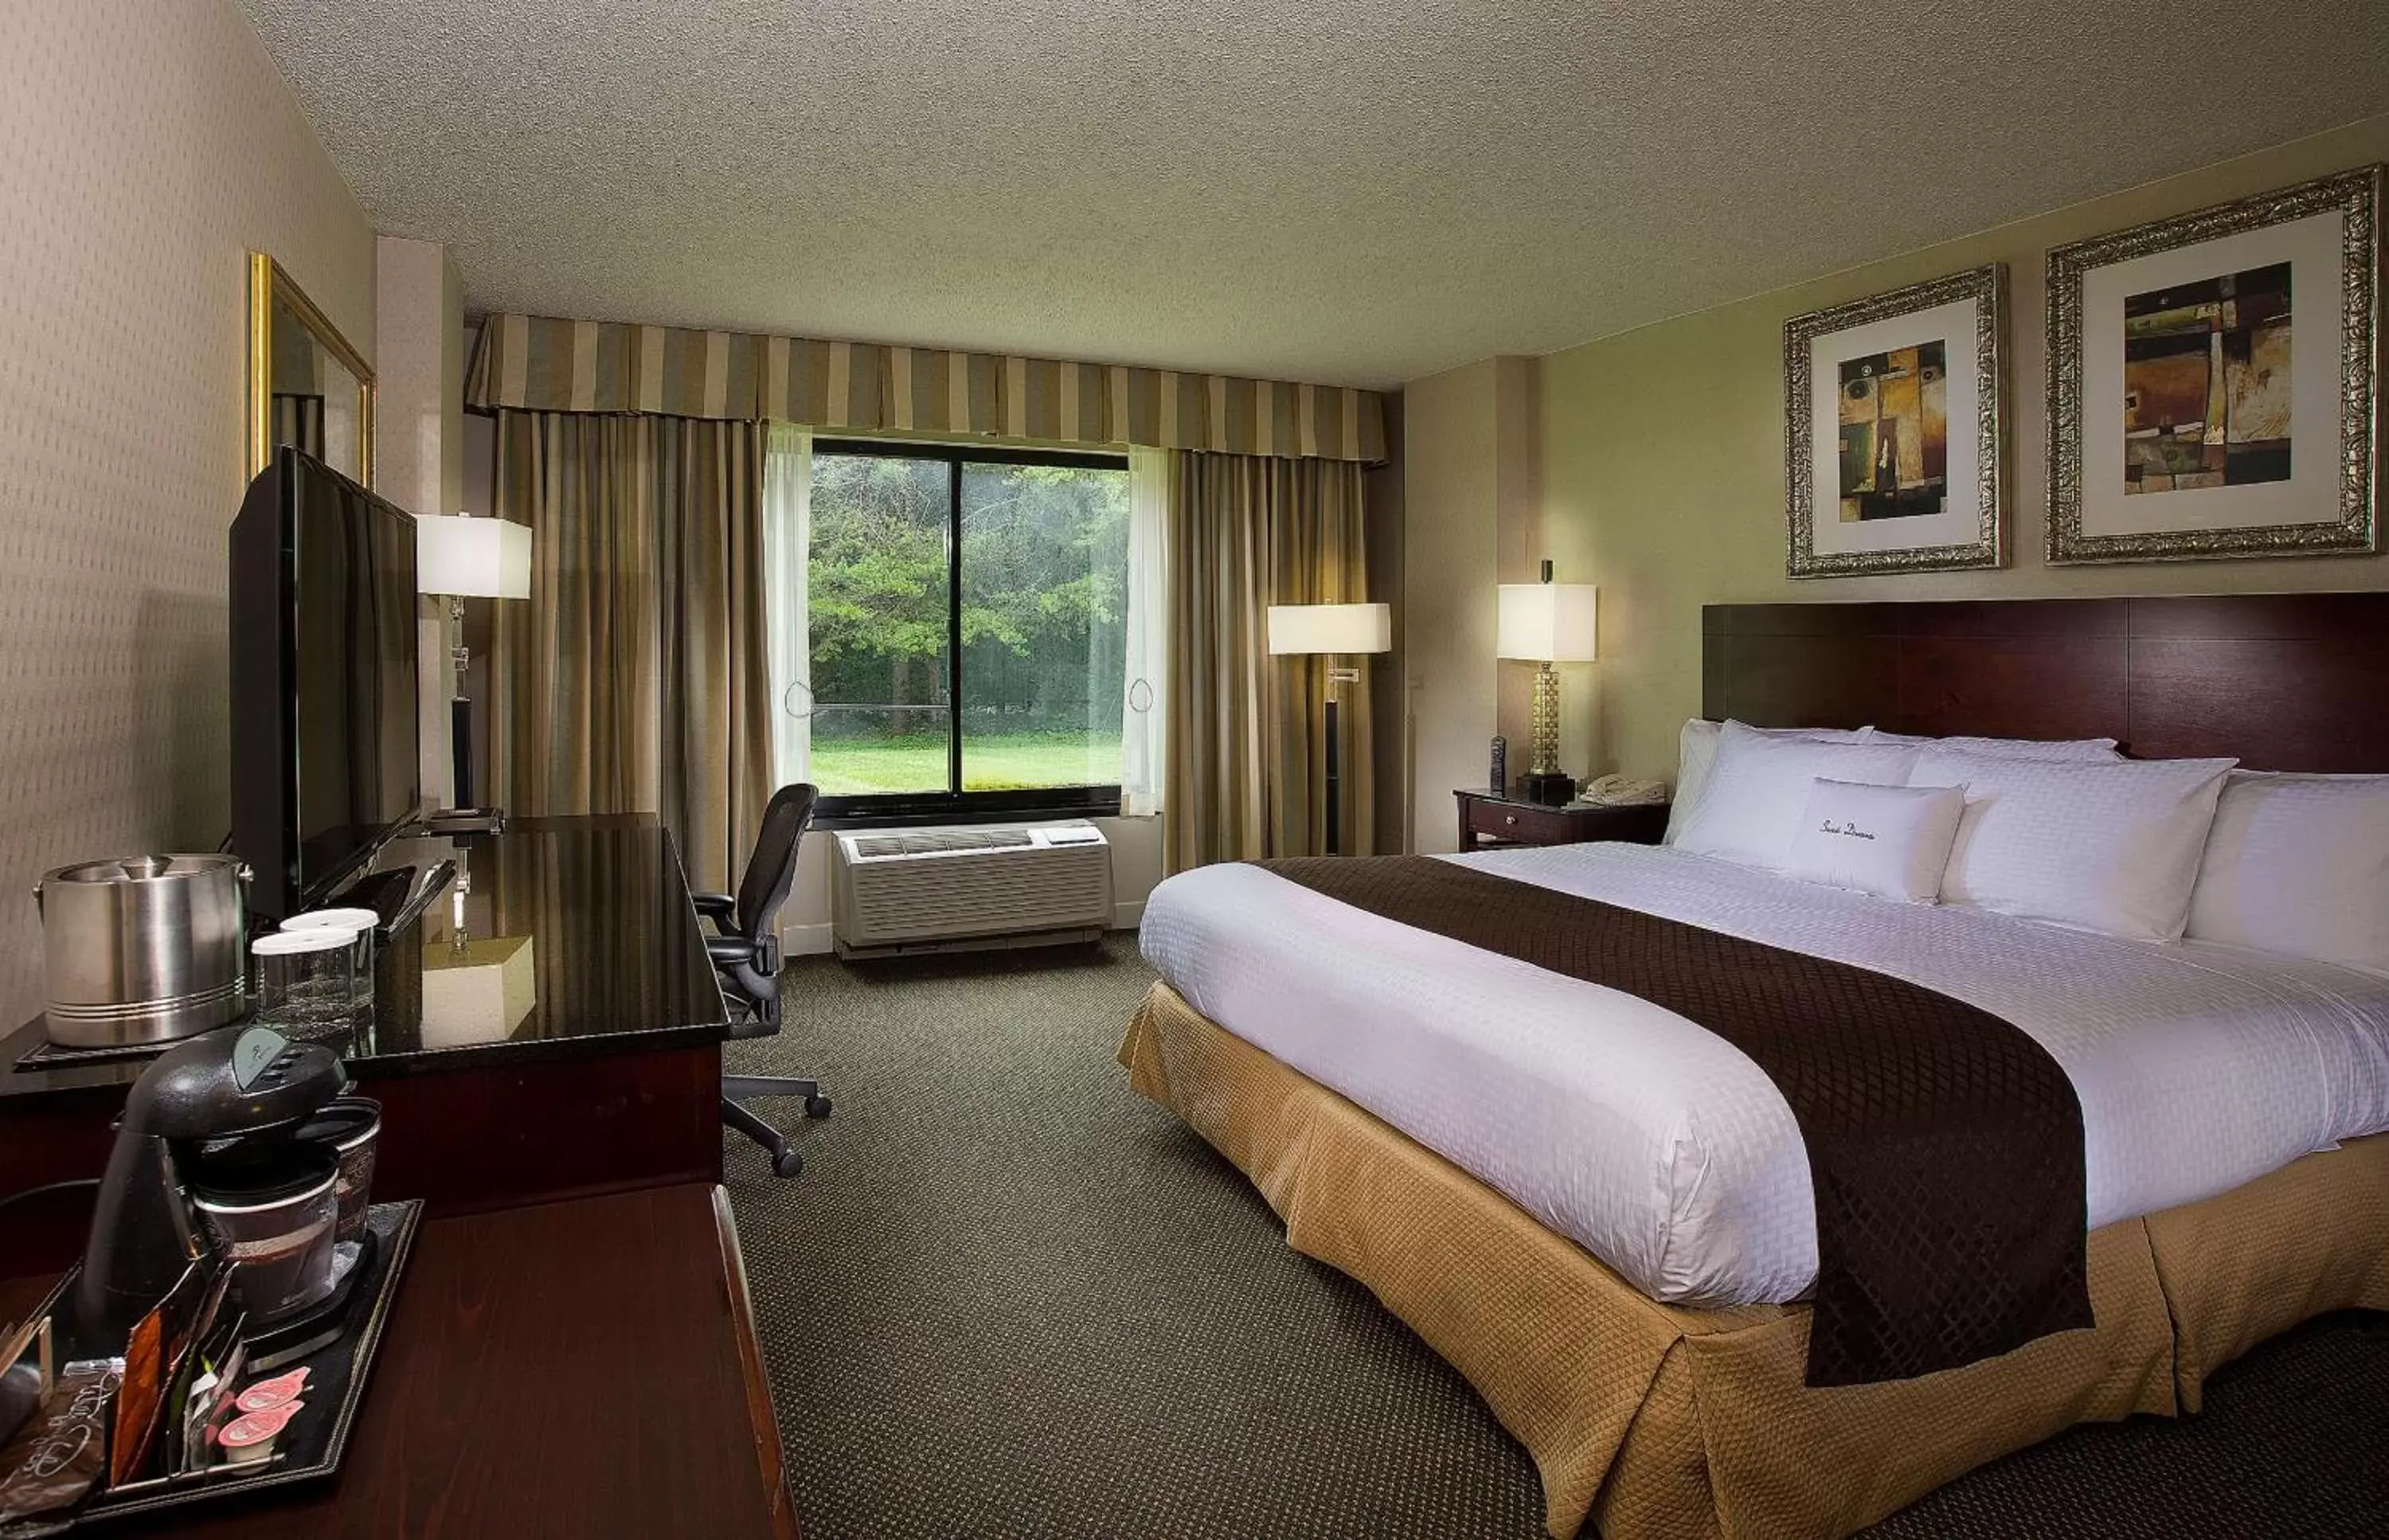 Bedroom in DoubleTree by Hilton Charlotte Airport